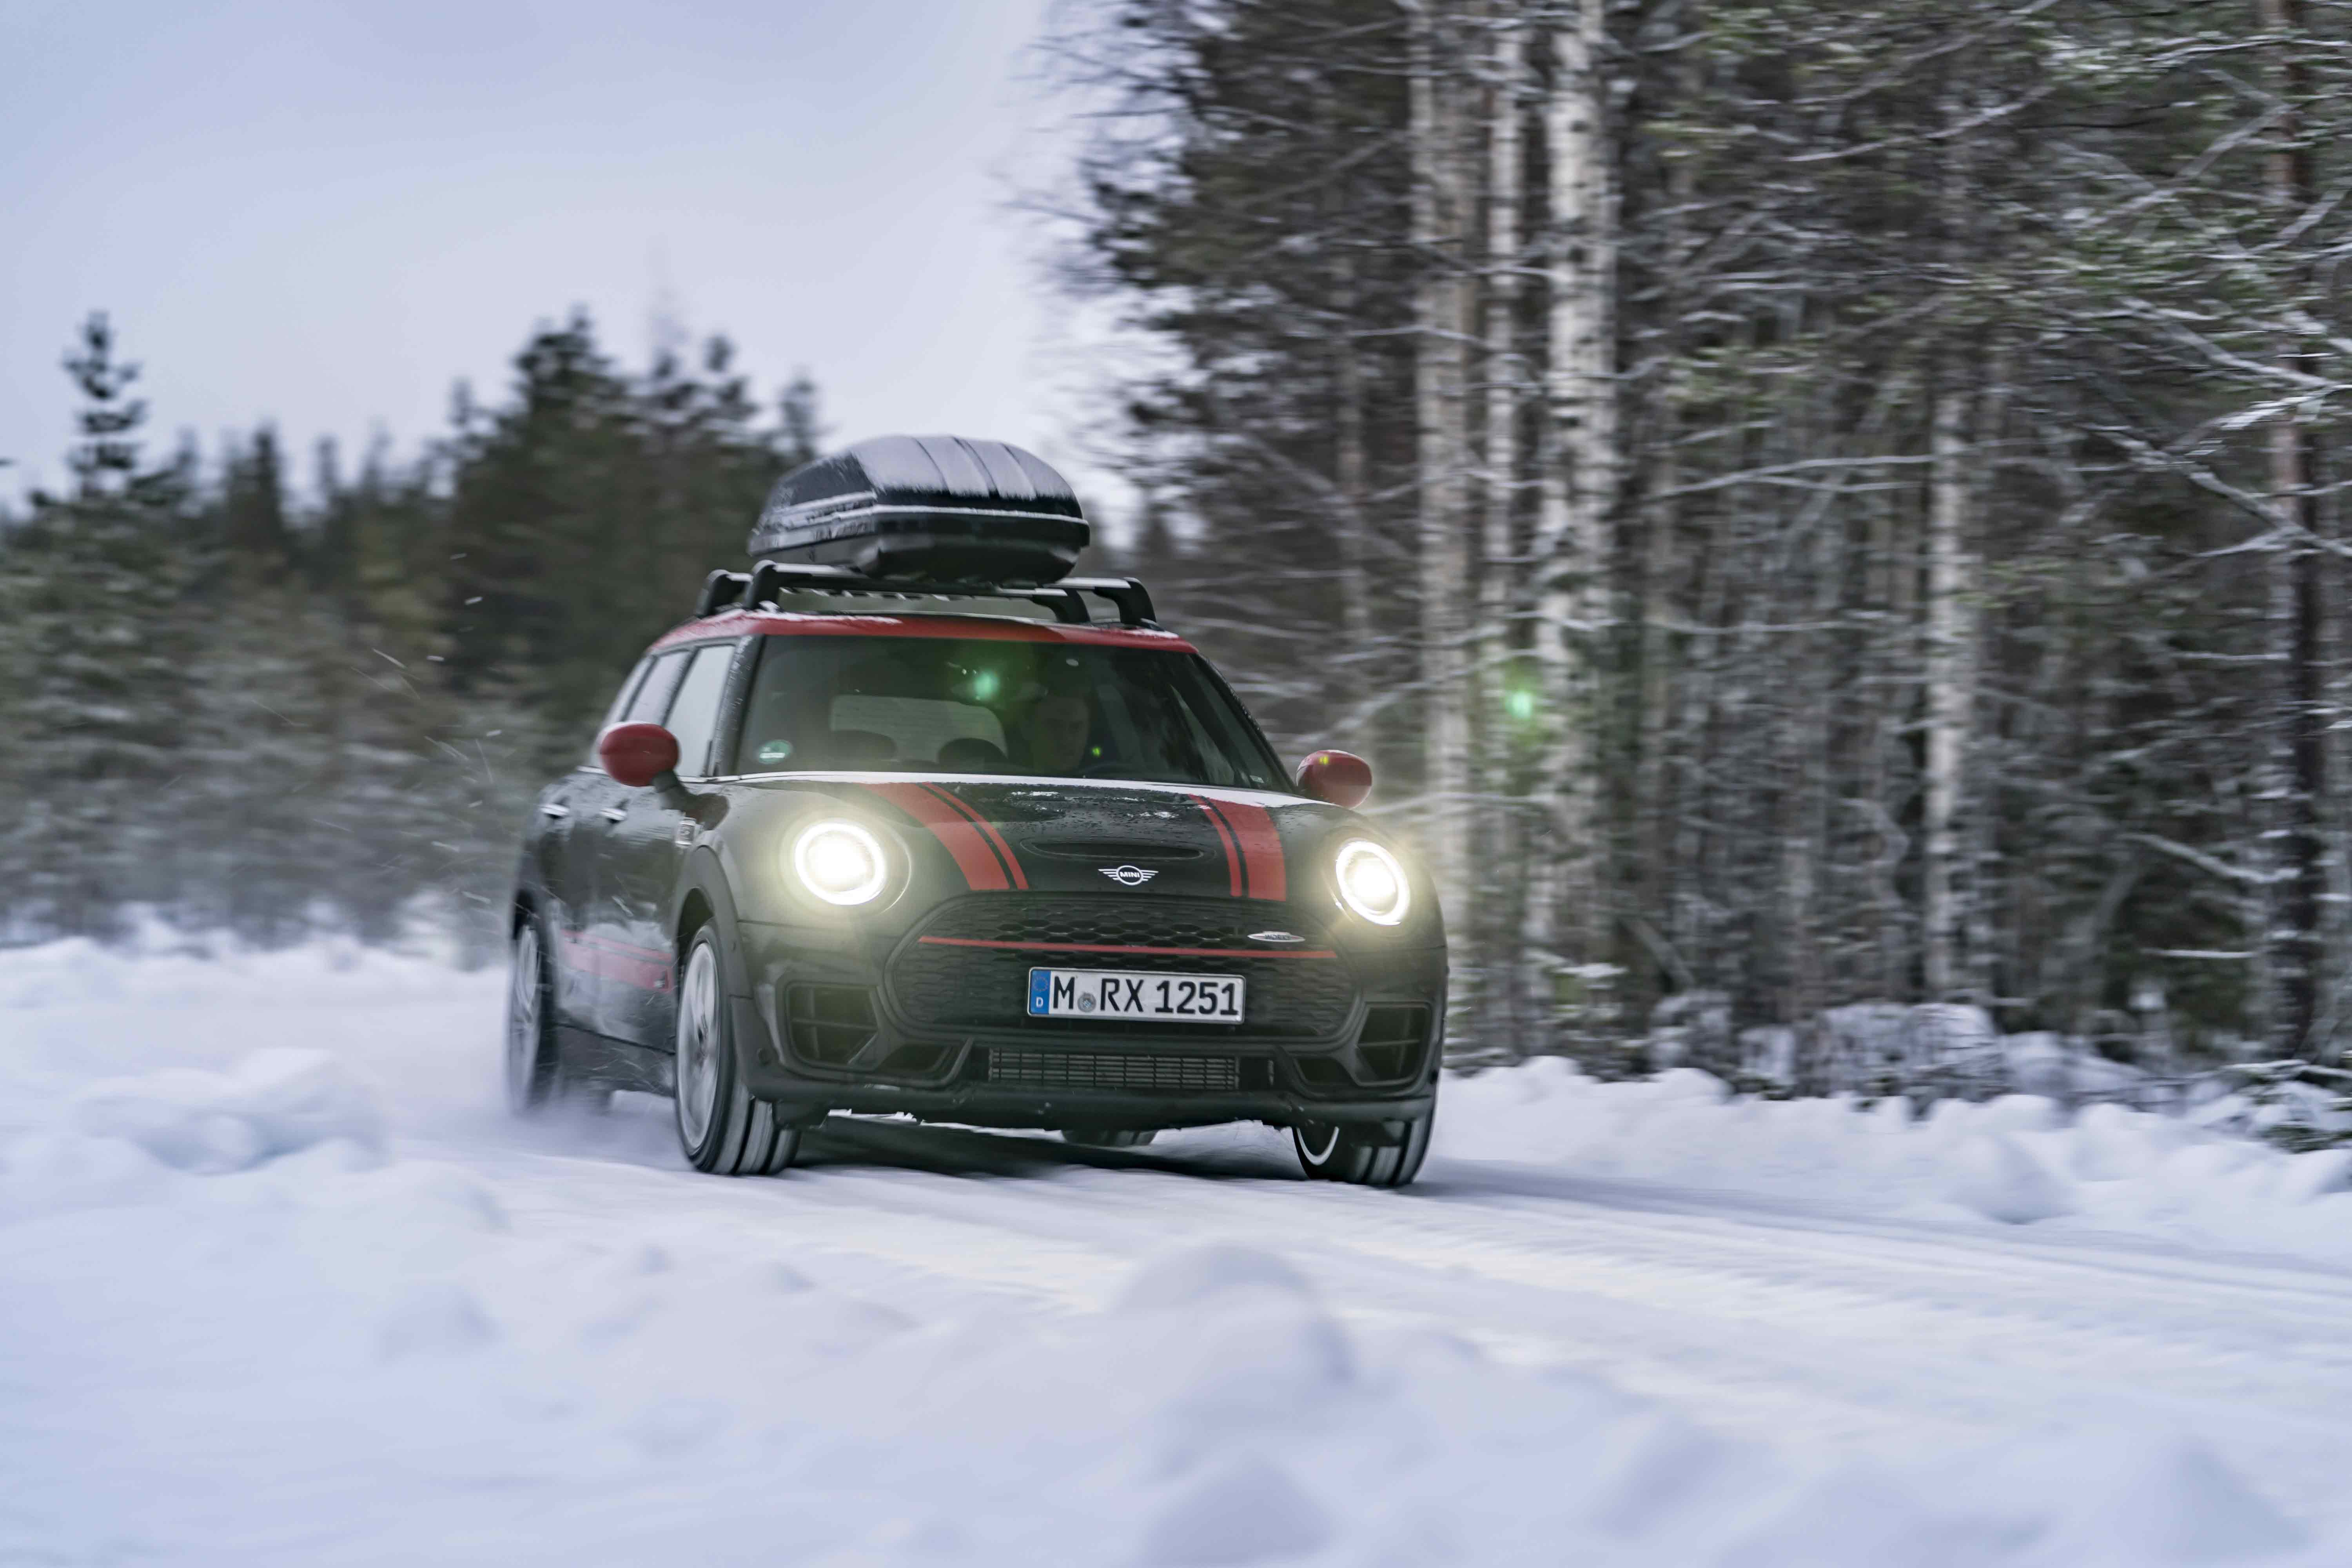 SLEIGH RIDE PROPELLED BY 306 HORSEPOWER THROUGH LAPLAND IN THE MINI JOHN COOPER WORKS CLUBMAN